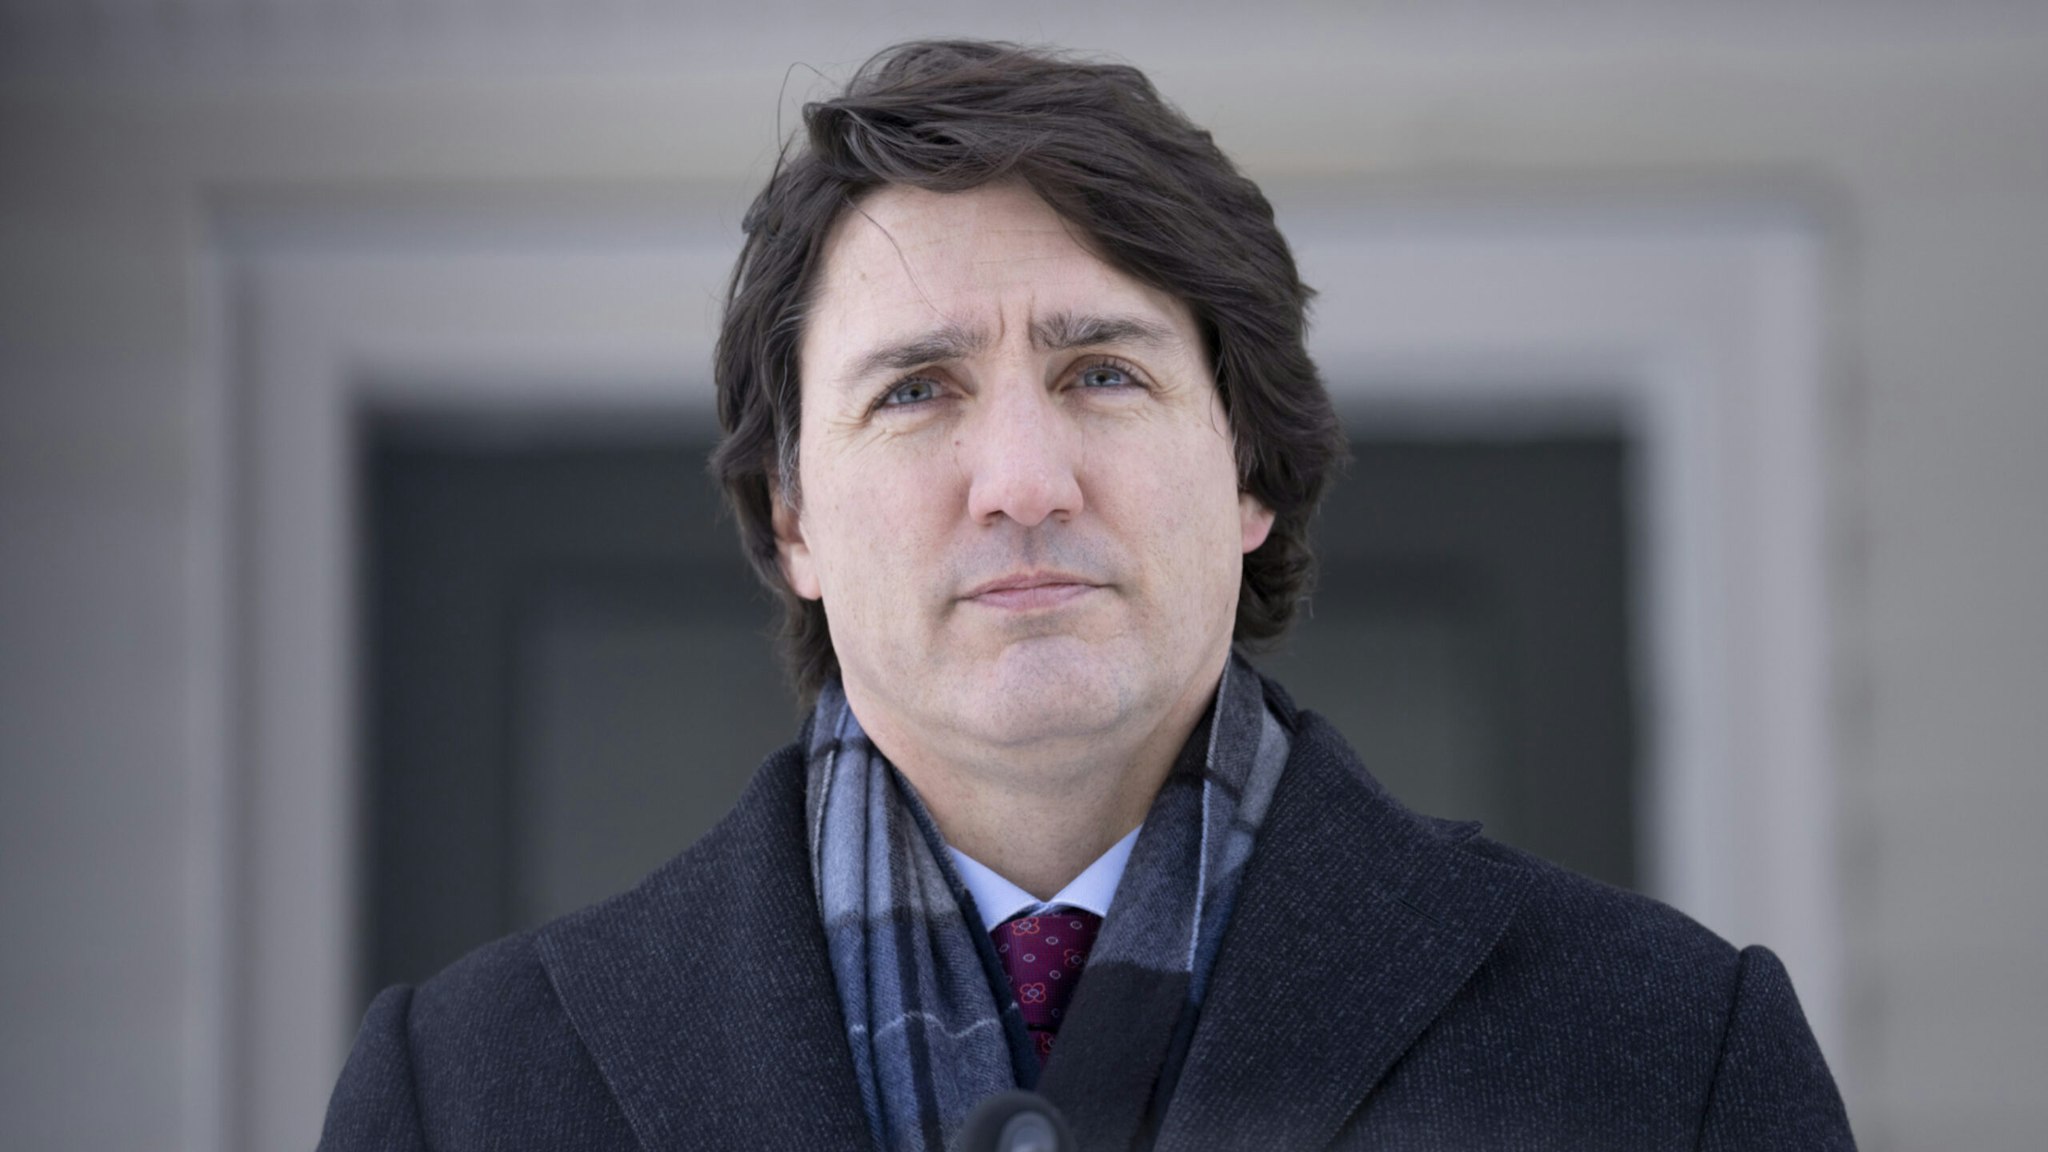 Justin Trudeau, Canadas prime minister, during a news conference from the National Capital Region in Canada on Monday, Jan. 31, 2022.